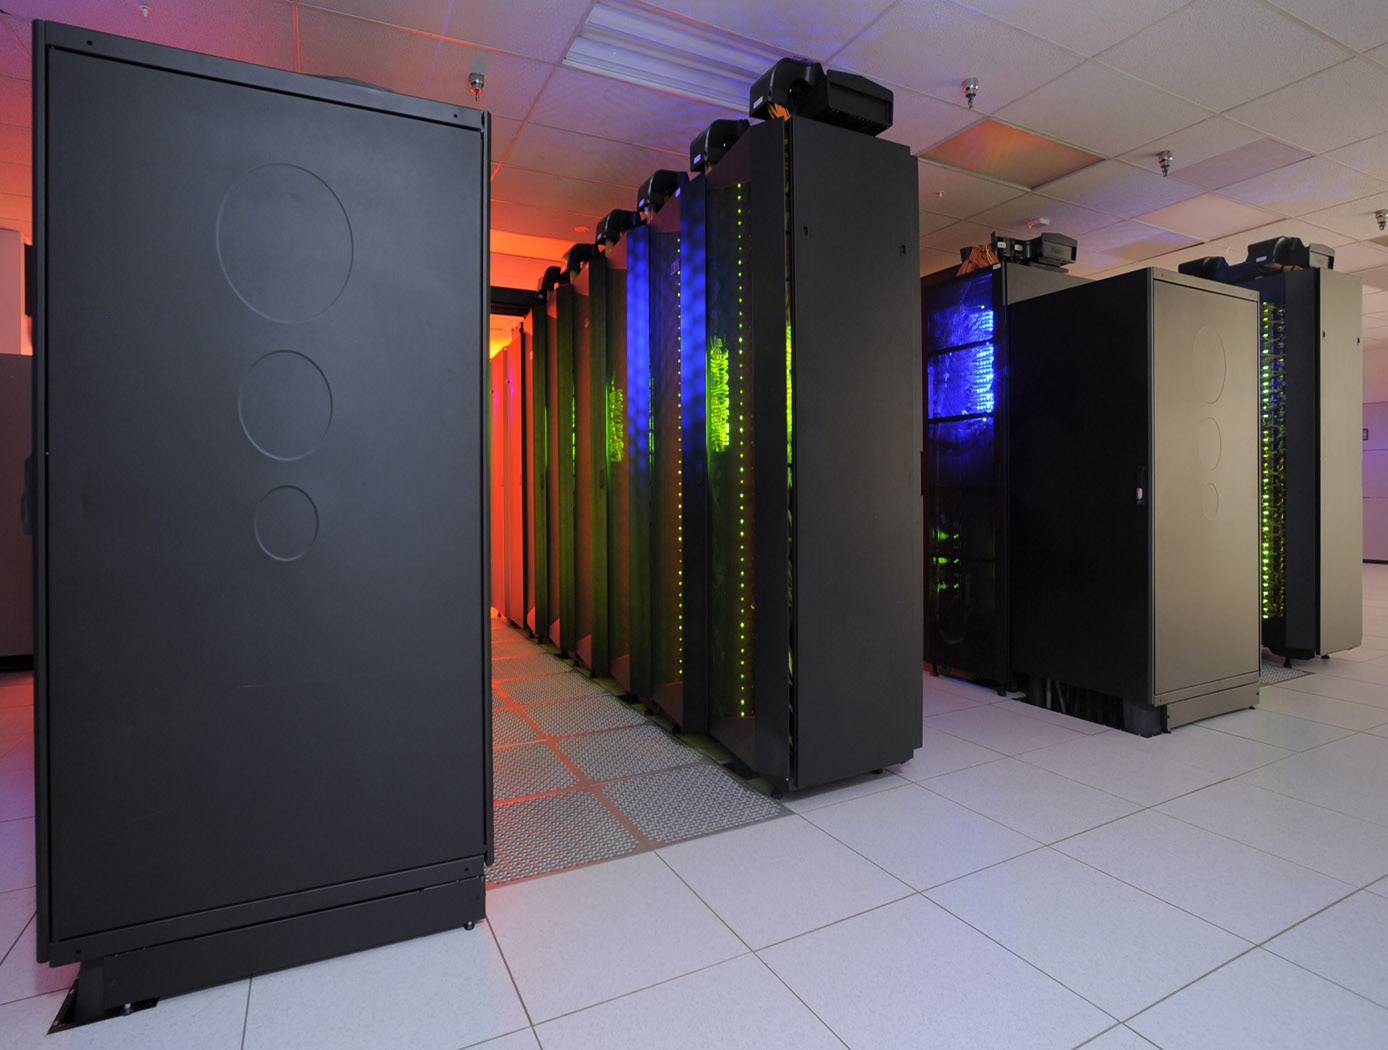 The heart of the NASA Center for Climate Simulation (NCCS) is the Discover supercomputer. In 2009, NCCS added more than 8,000 computer processors to Discover, for a total of nearly 15,000 processors.